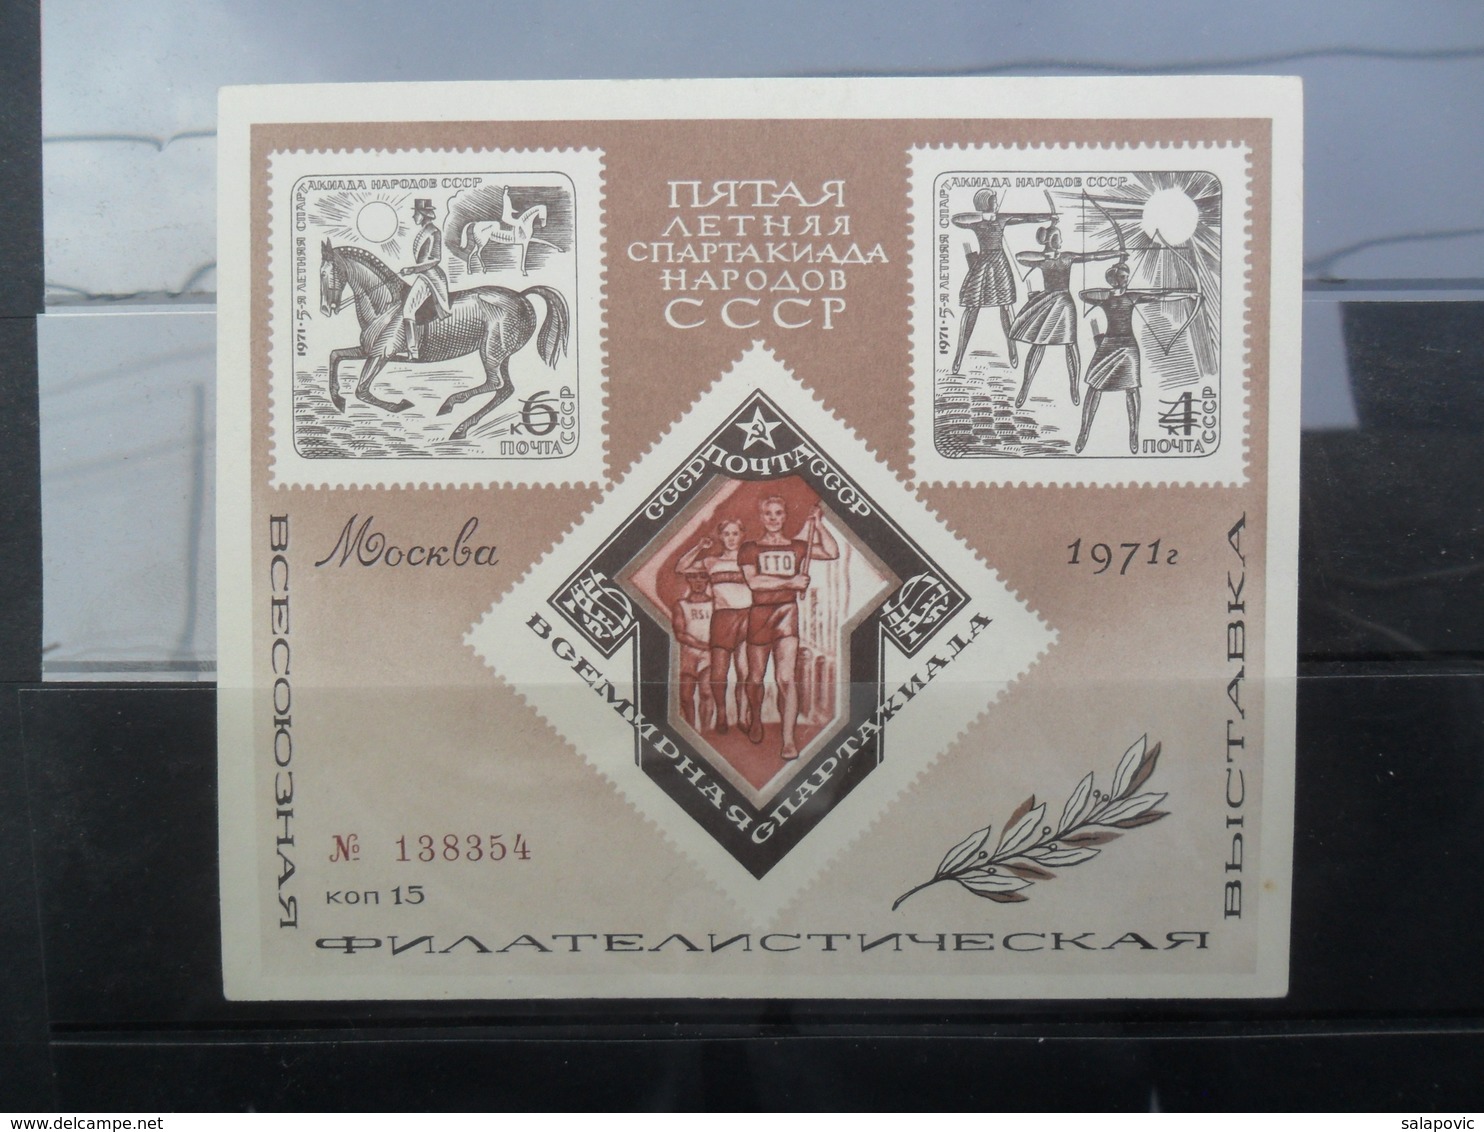 STAMP USSR RUSSIA Mint Block BF (**) Local Souvenir Sheet 1971 Poster Sport Archer Athletic Moscow - Local & Private